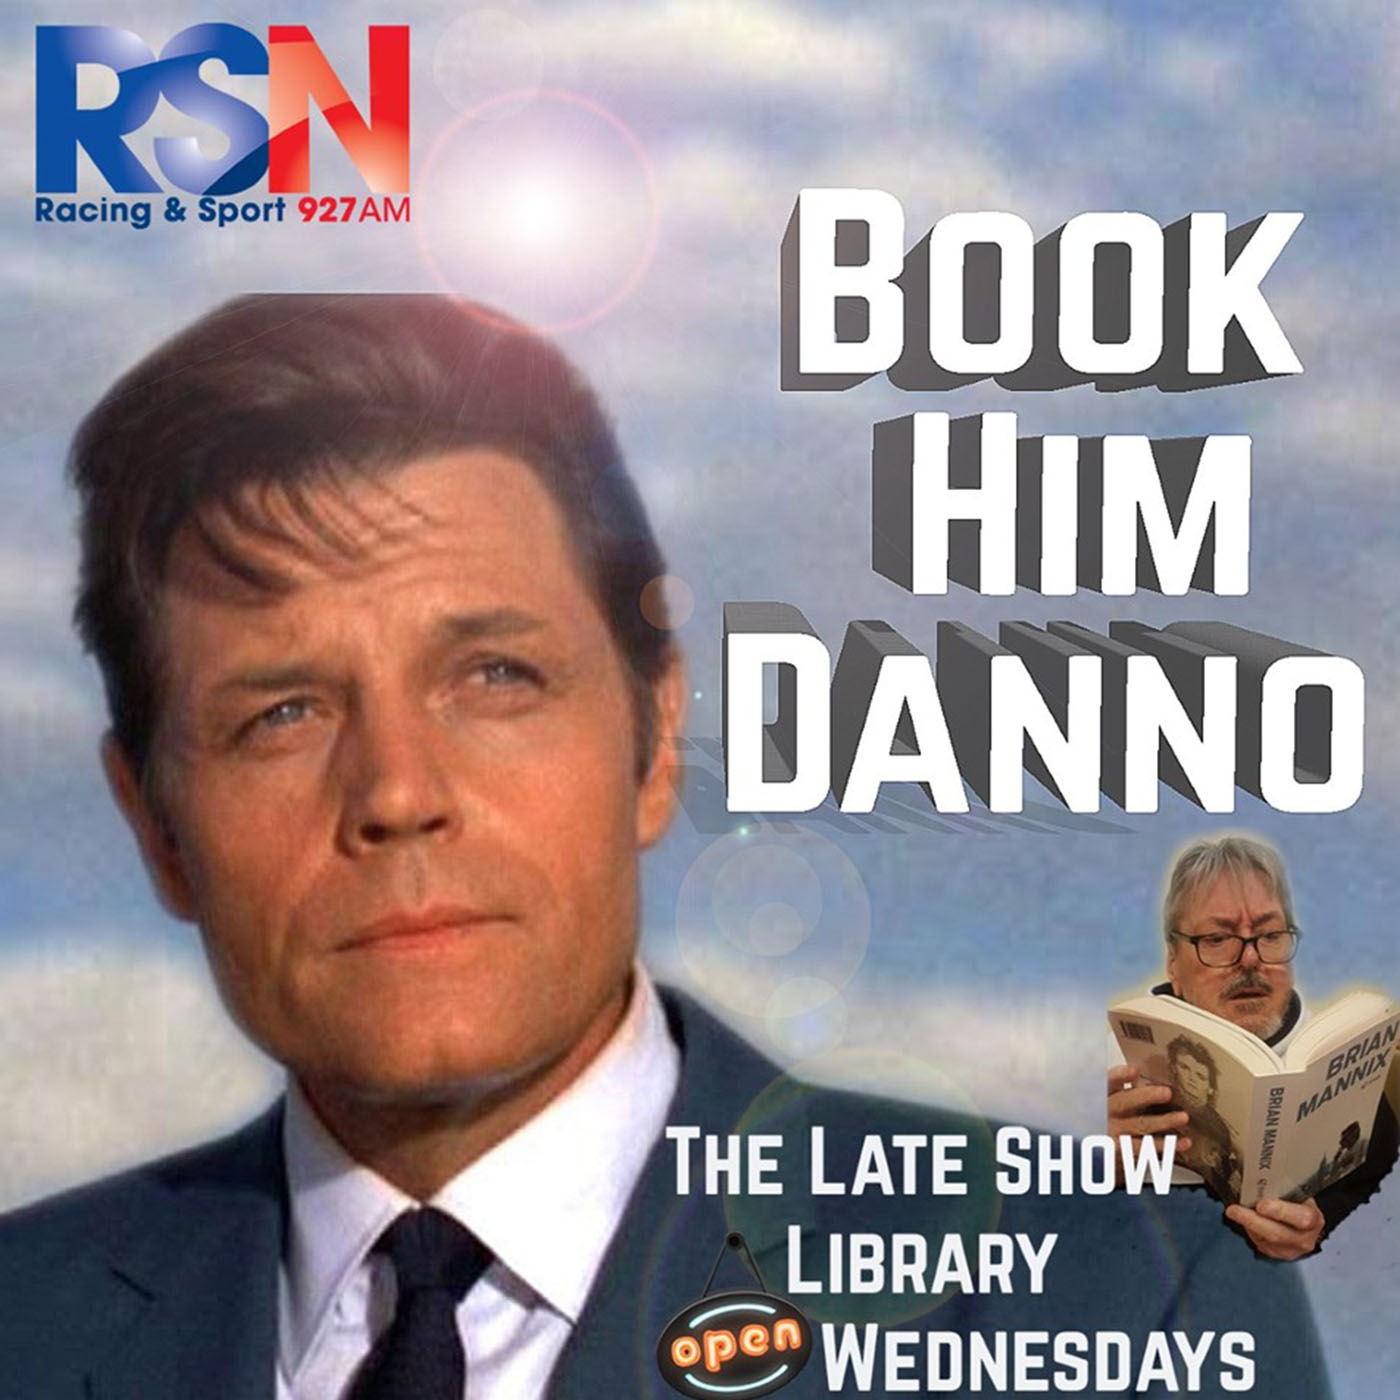 The Late Show Library